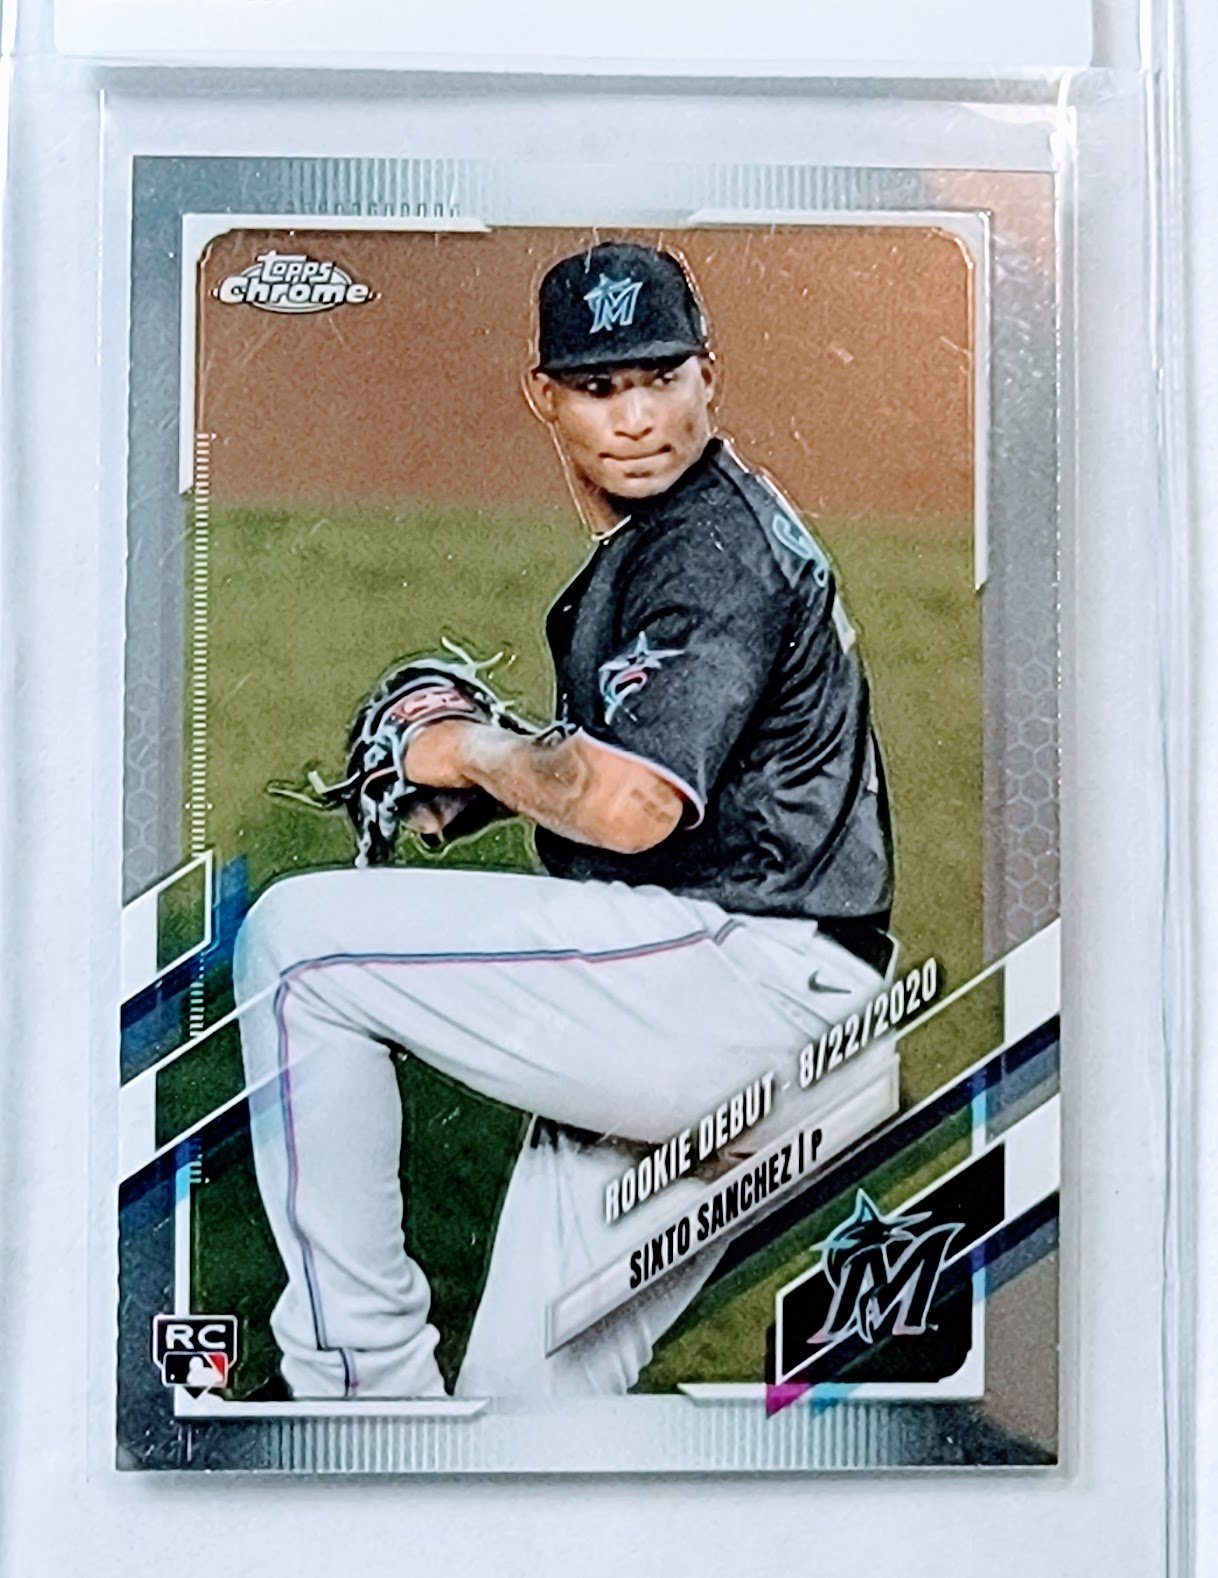 2021 Topps Chrome Sixto Sanchez Rookie Debut Baseball Card AVM1 simple Xclusive Collectibles   